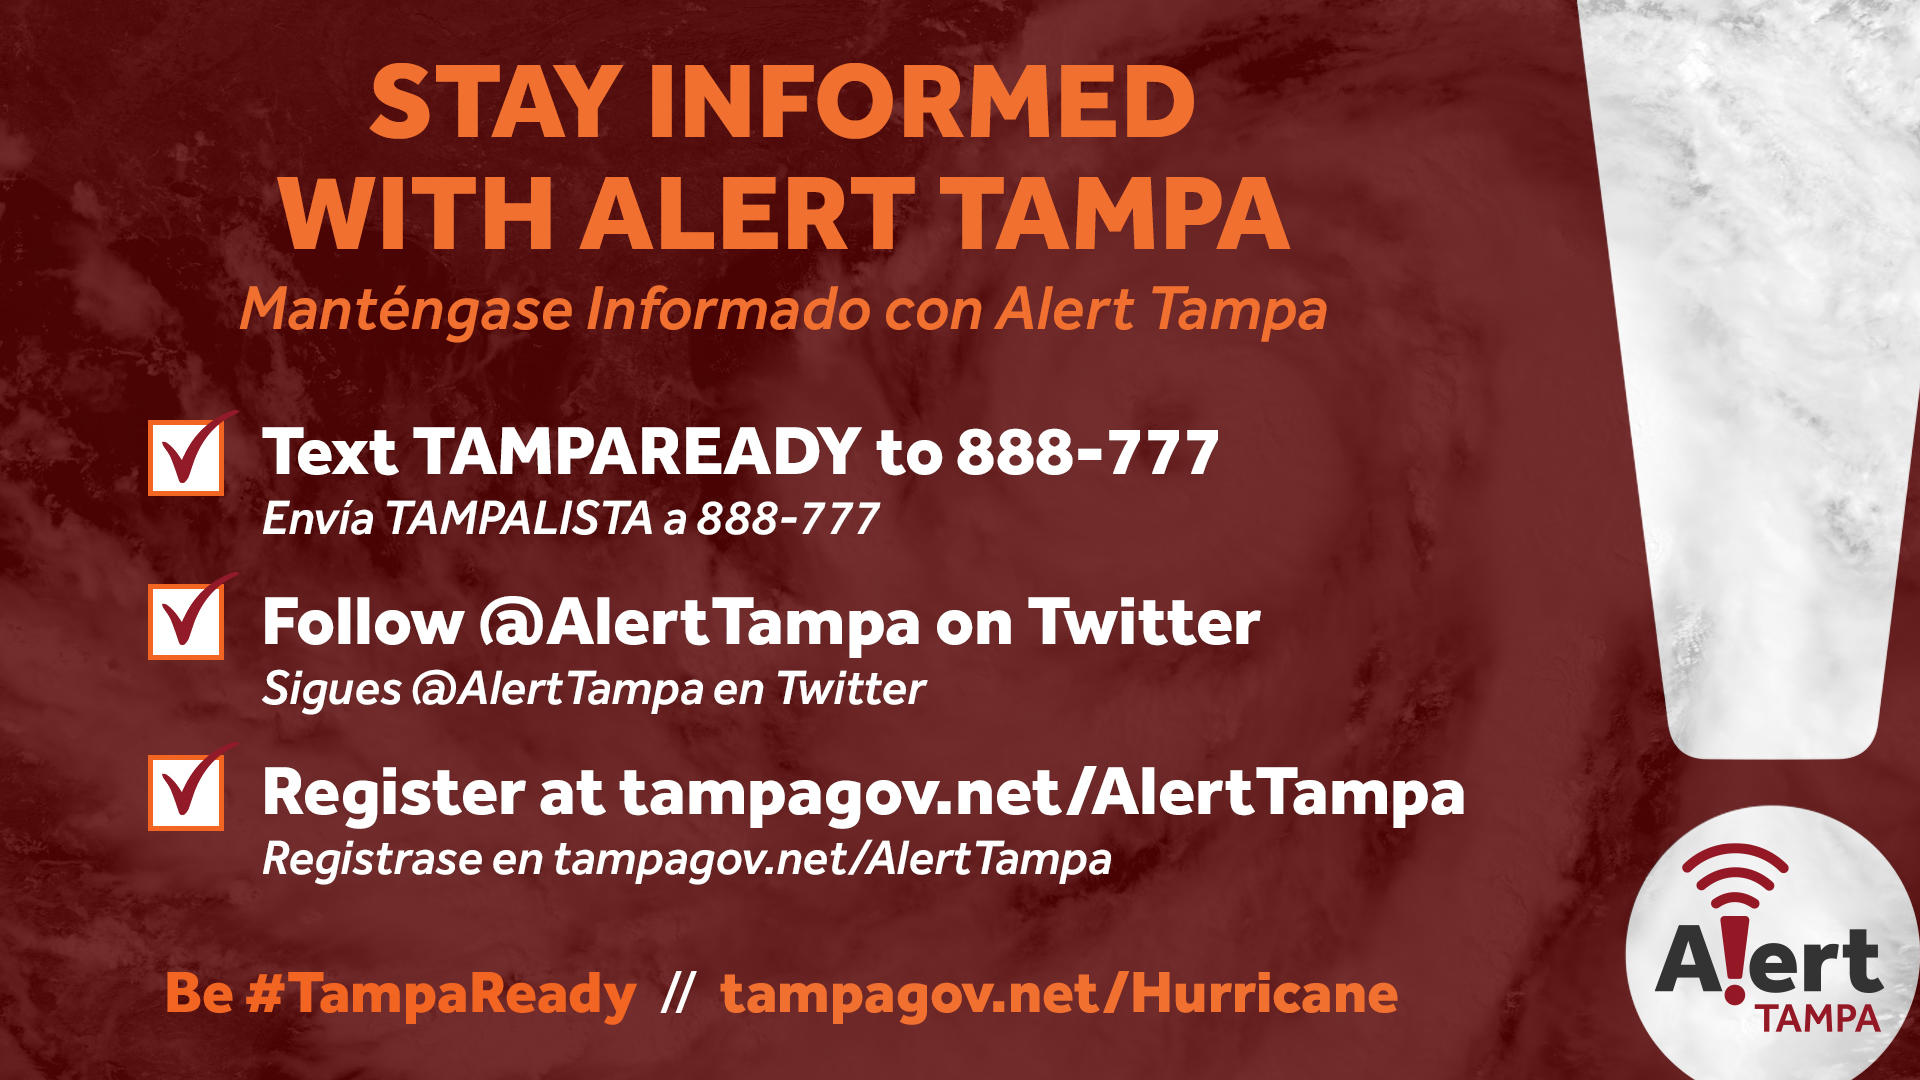 Stay informed with Alert Tampa - Text TAMPAREADY to 888-777 